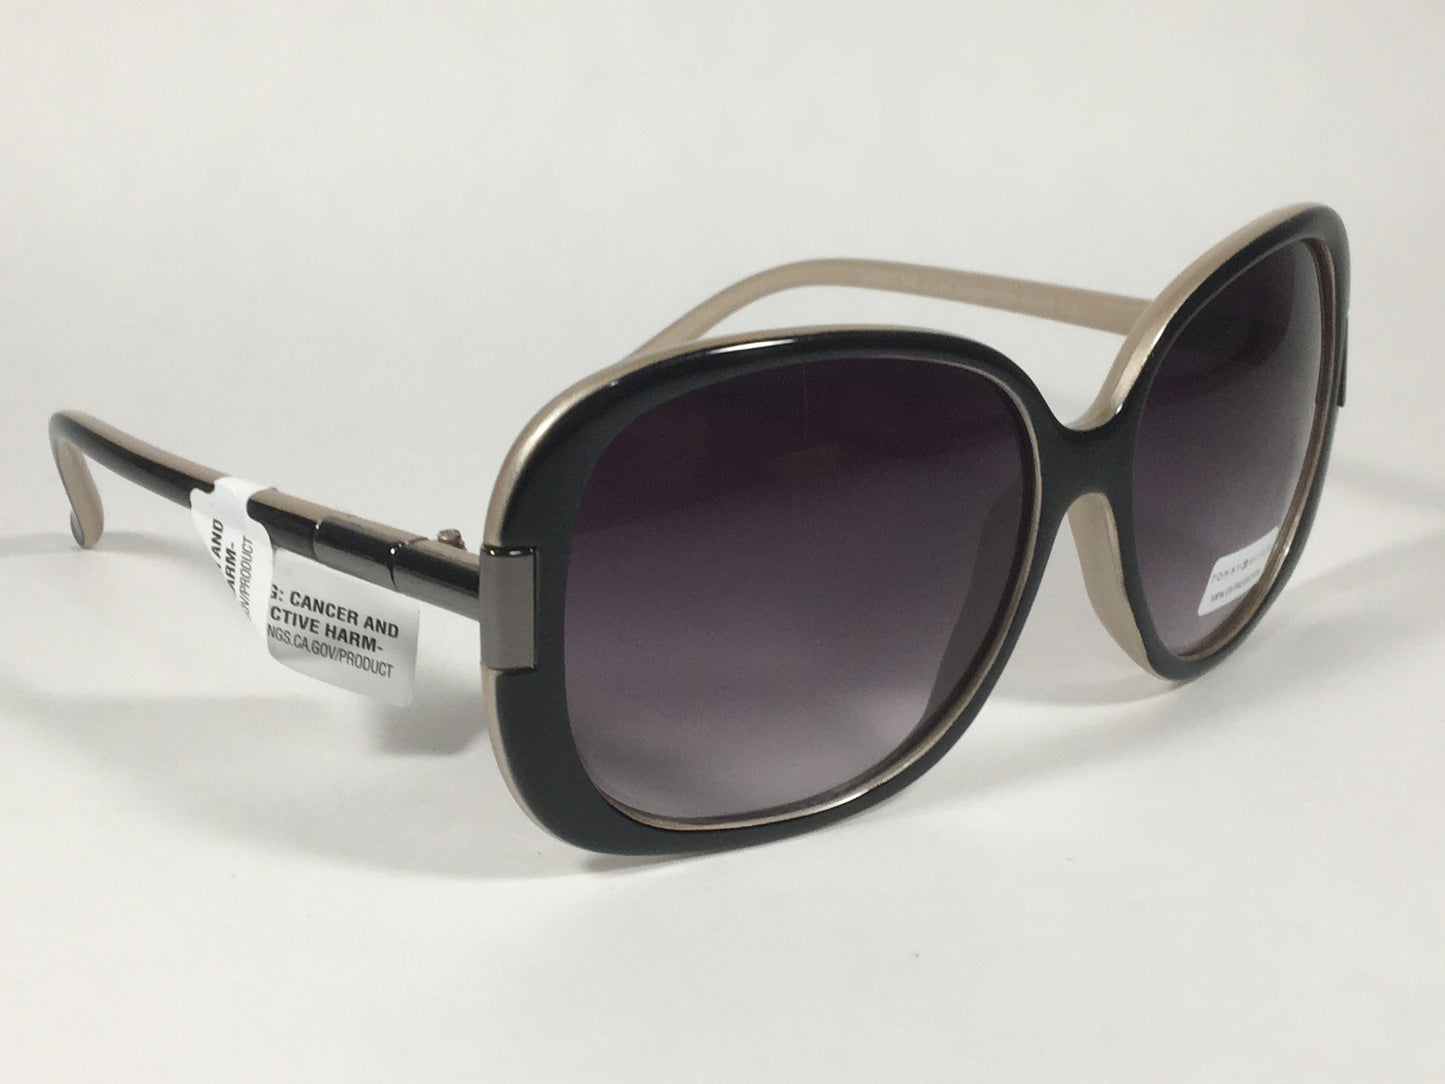 Tommy Hilfiger Janet Large Oval Sunglasses Two Tone Black And Tan Frame Gray Gradient Lens JANET WP OL90 - Sunglasses